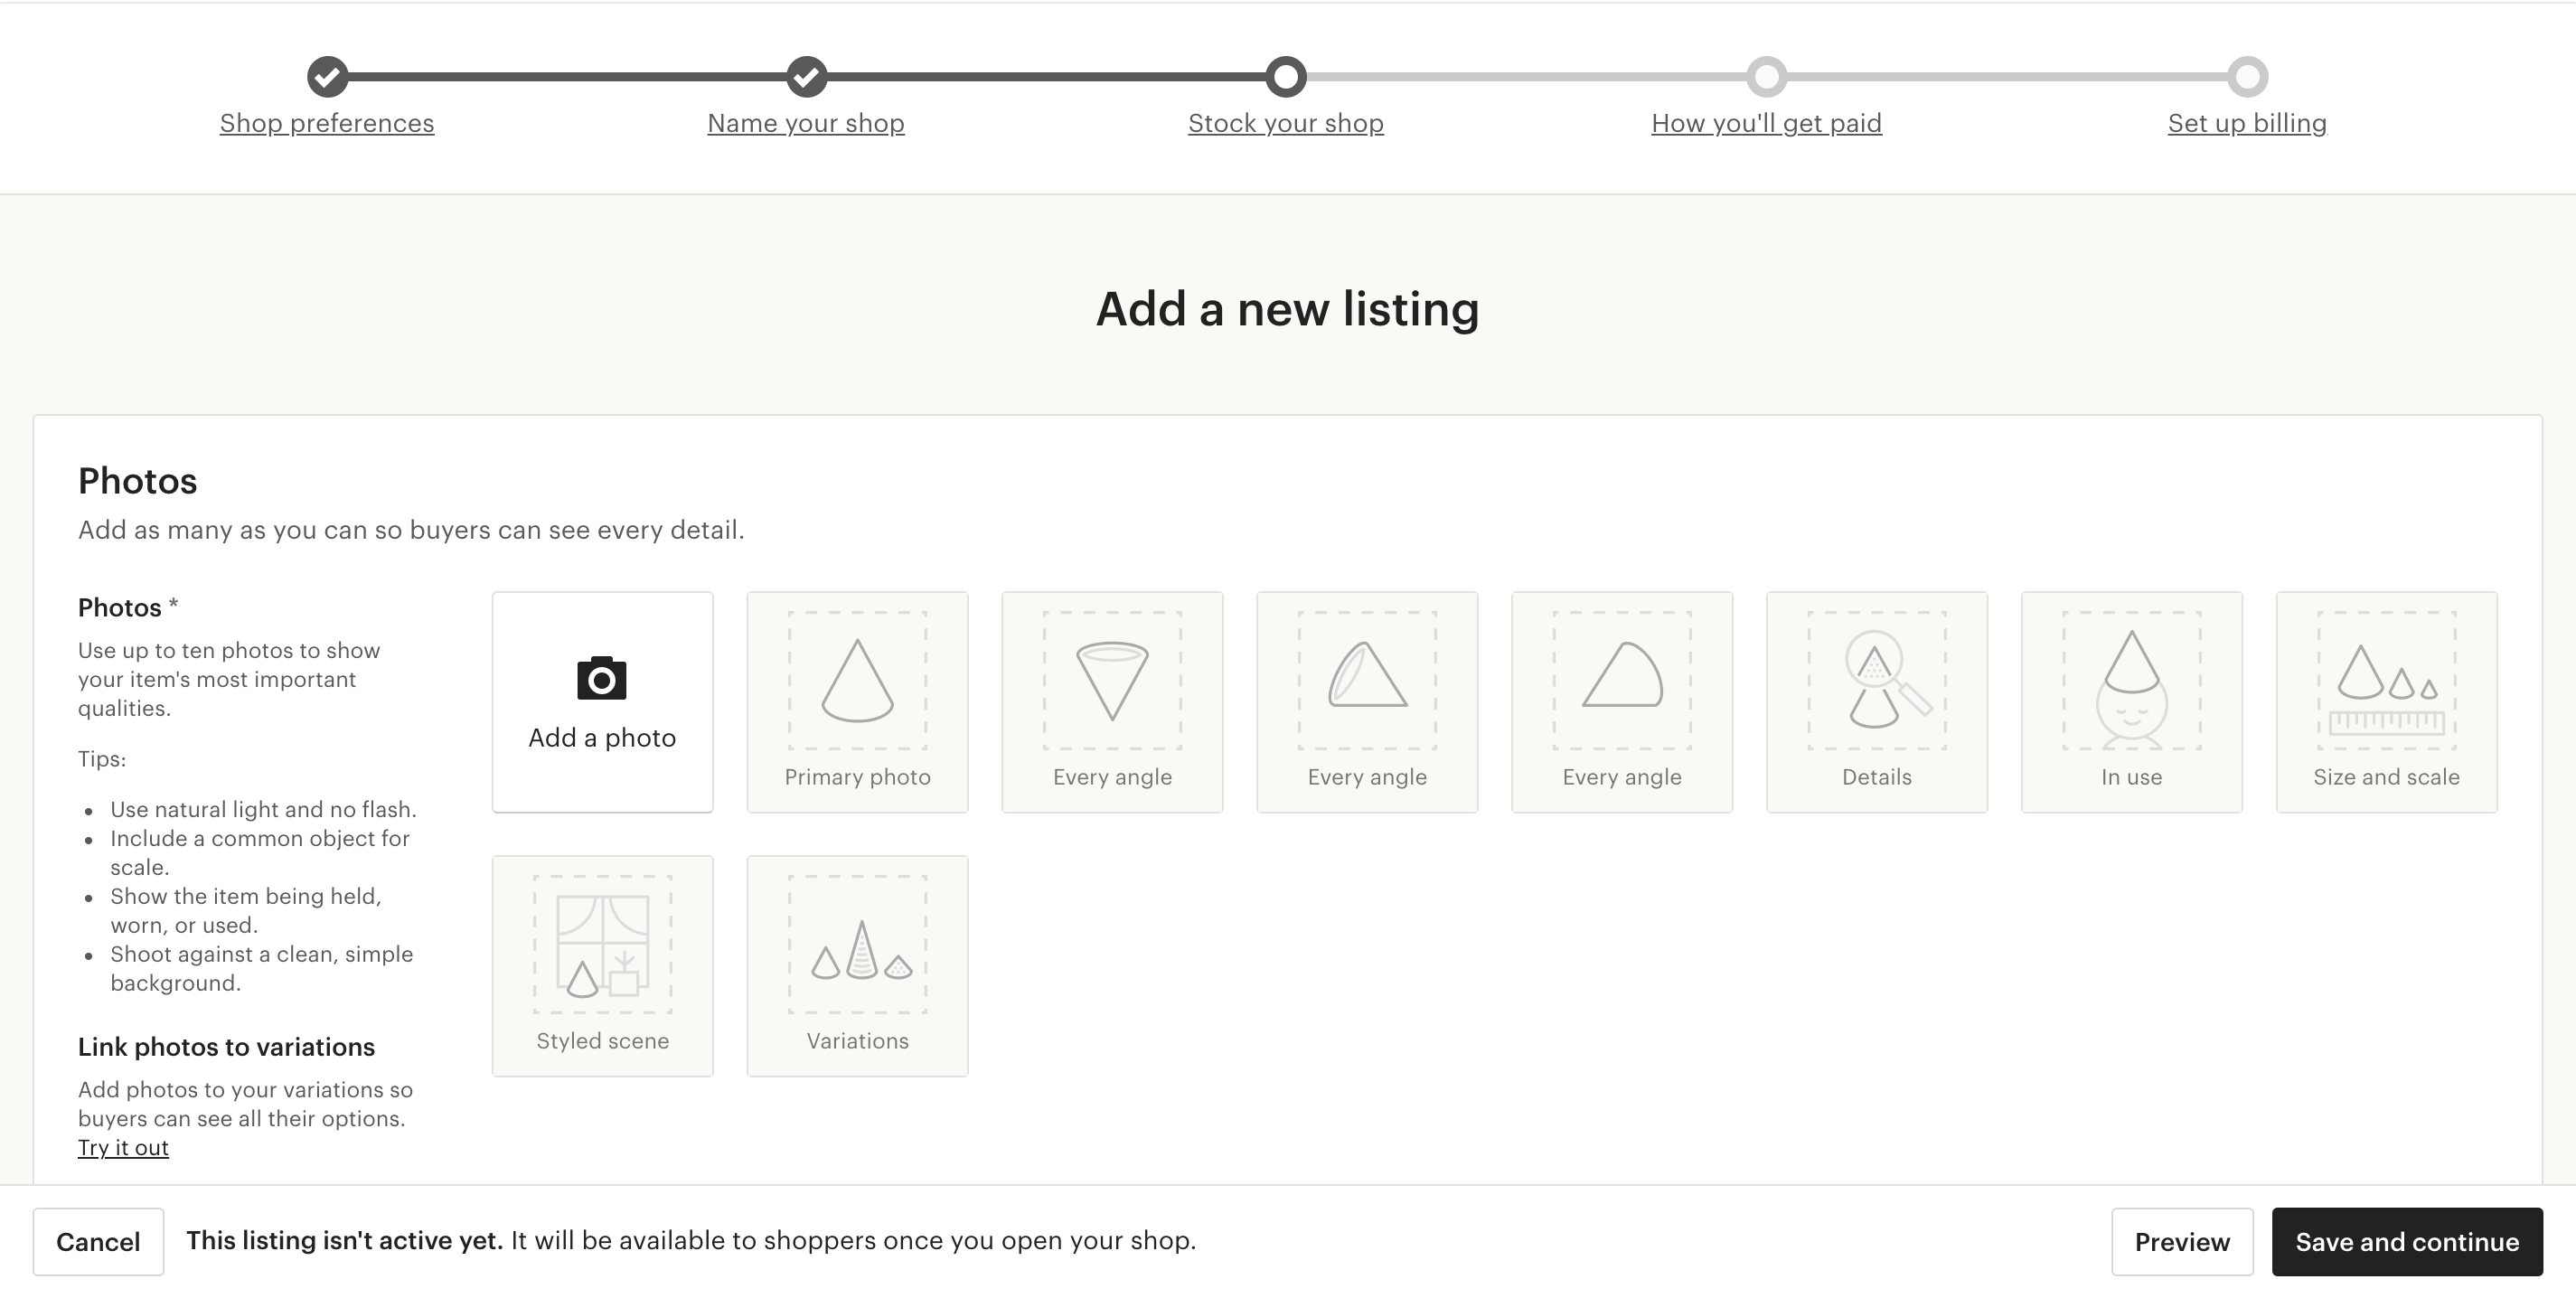 Add product listings to your Etsy shop